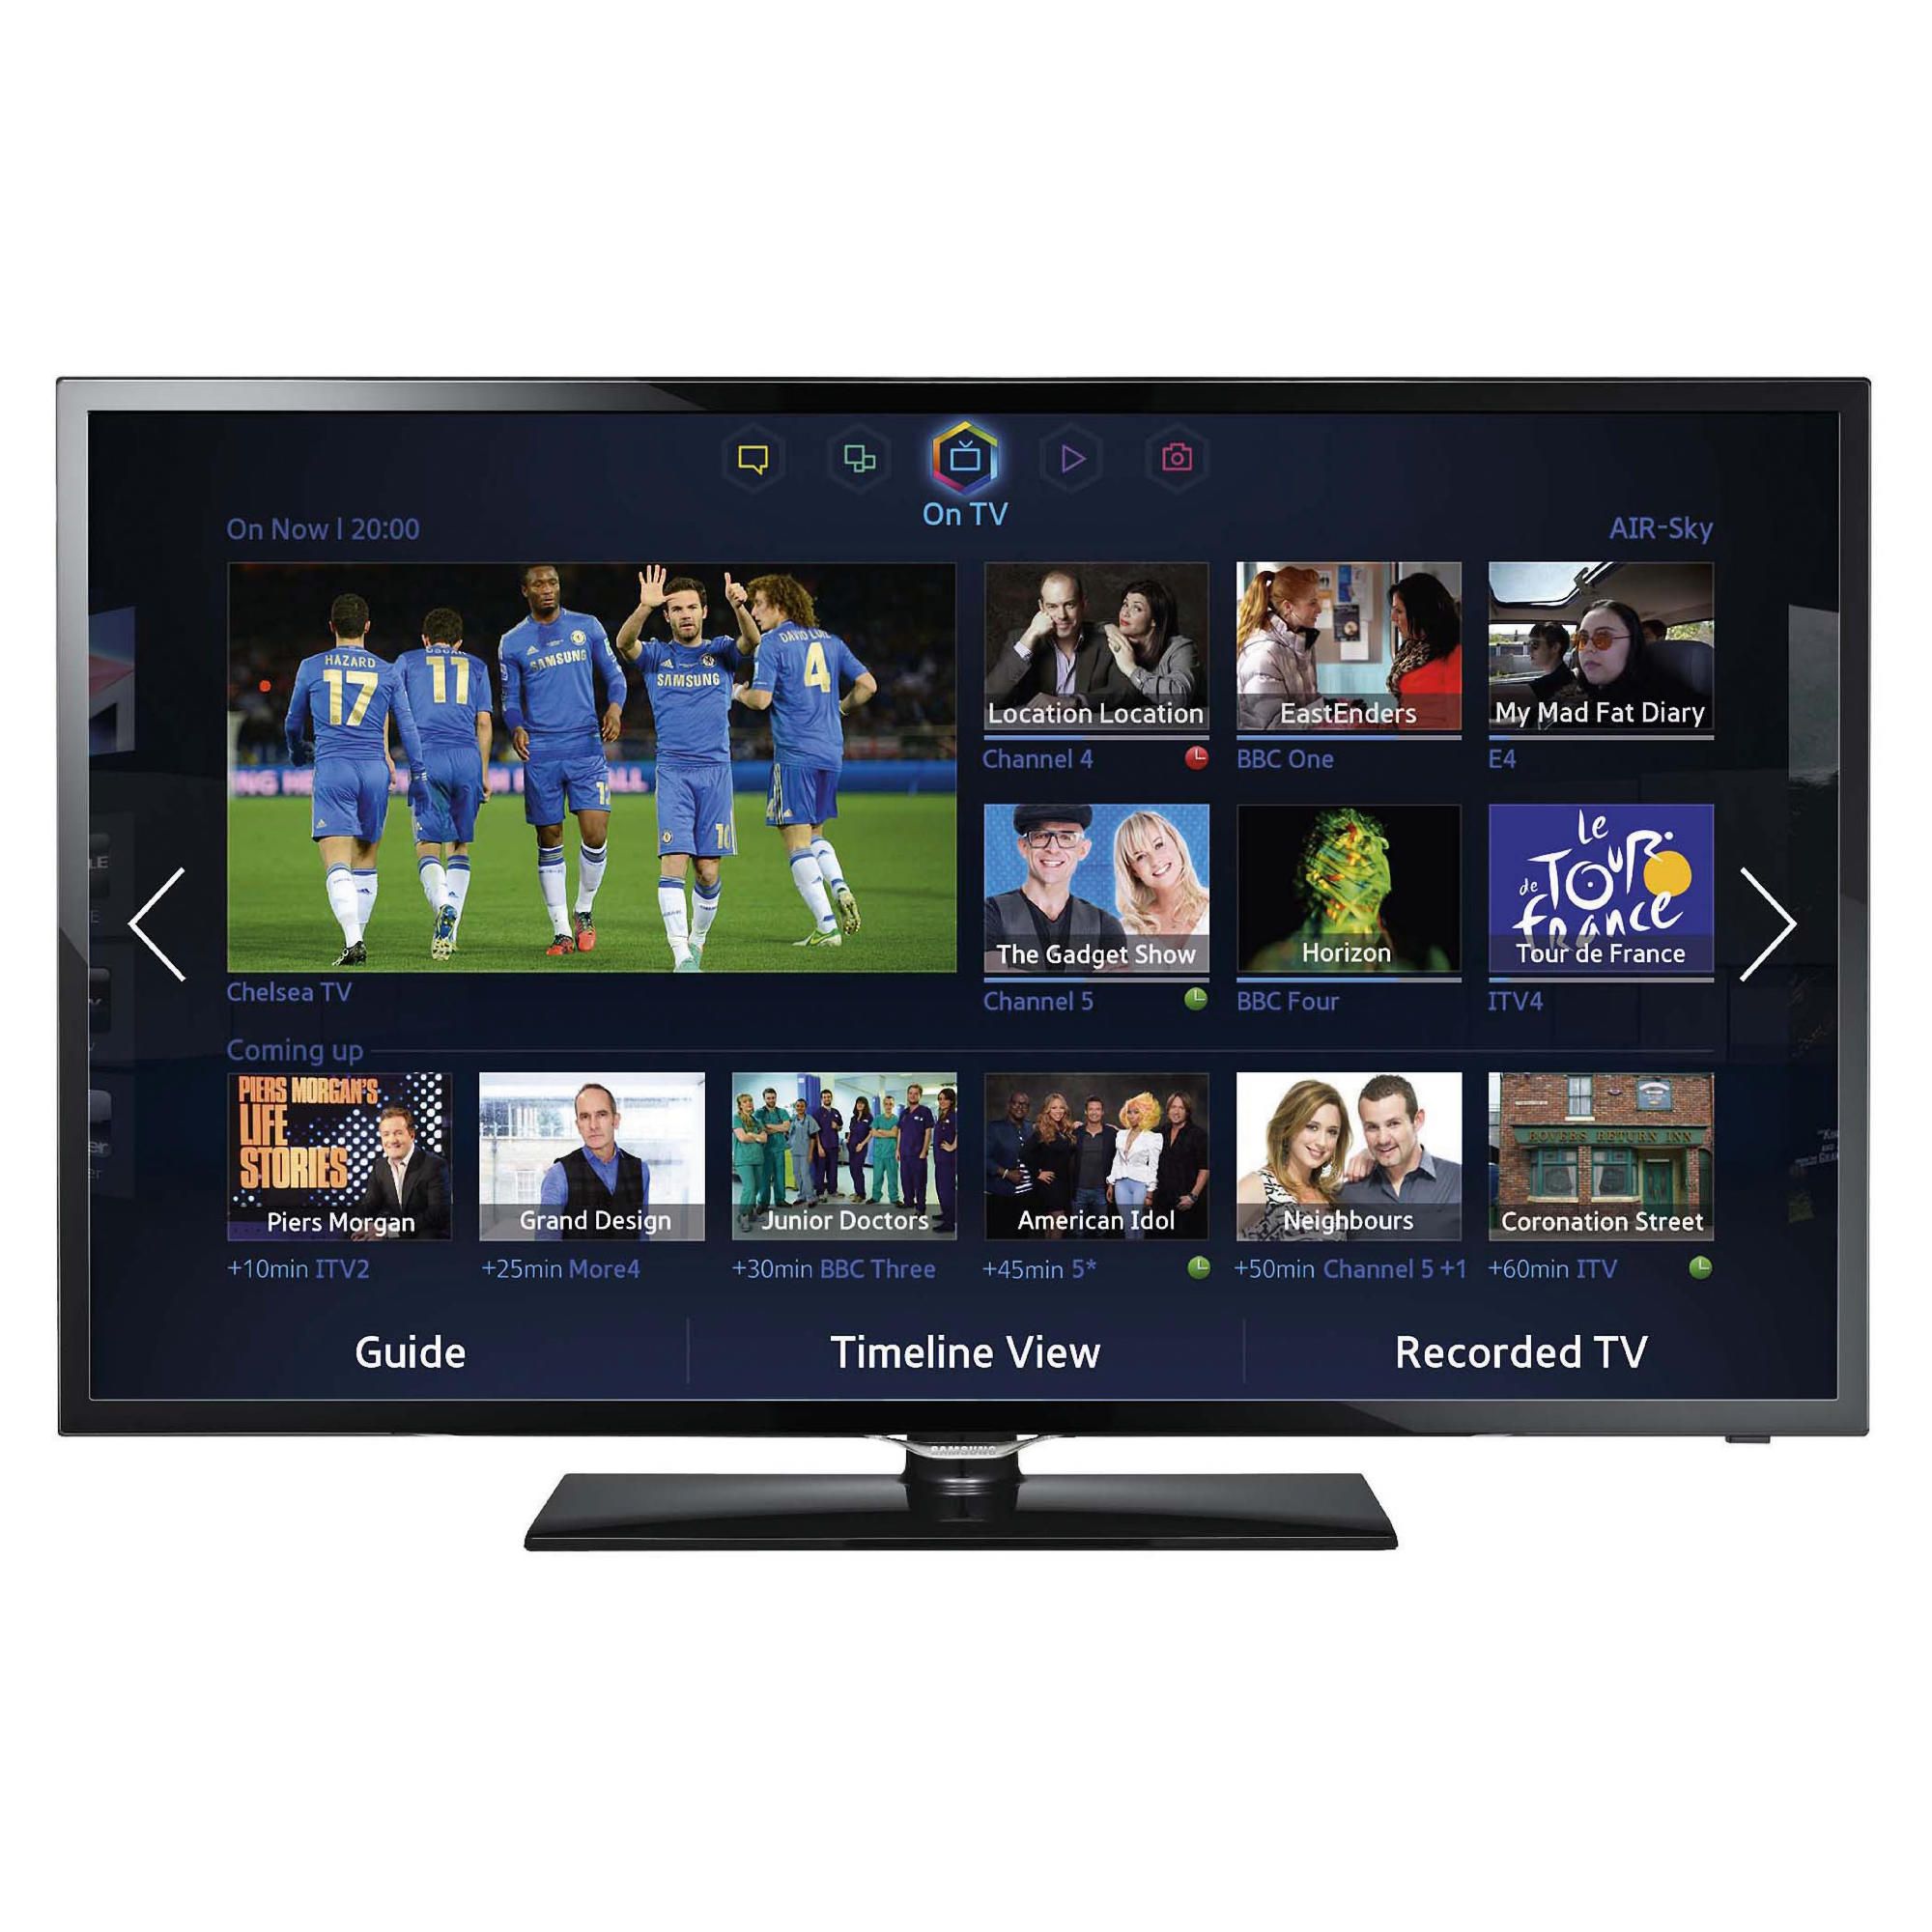 Samsung UE39F5300 39 Inch Full HD 1080p LED Smart TV with Freeview HD